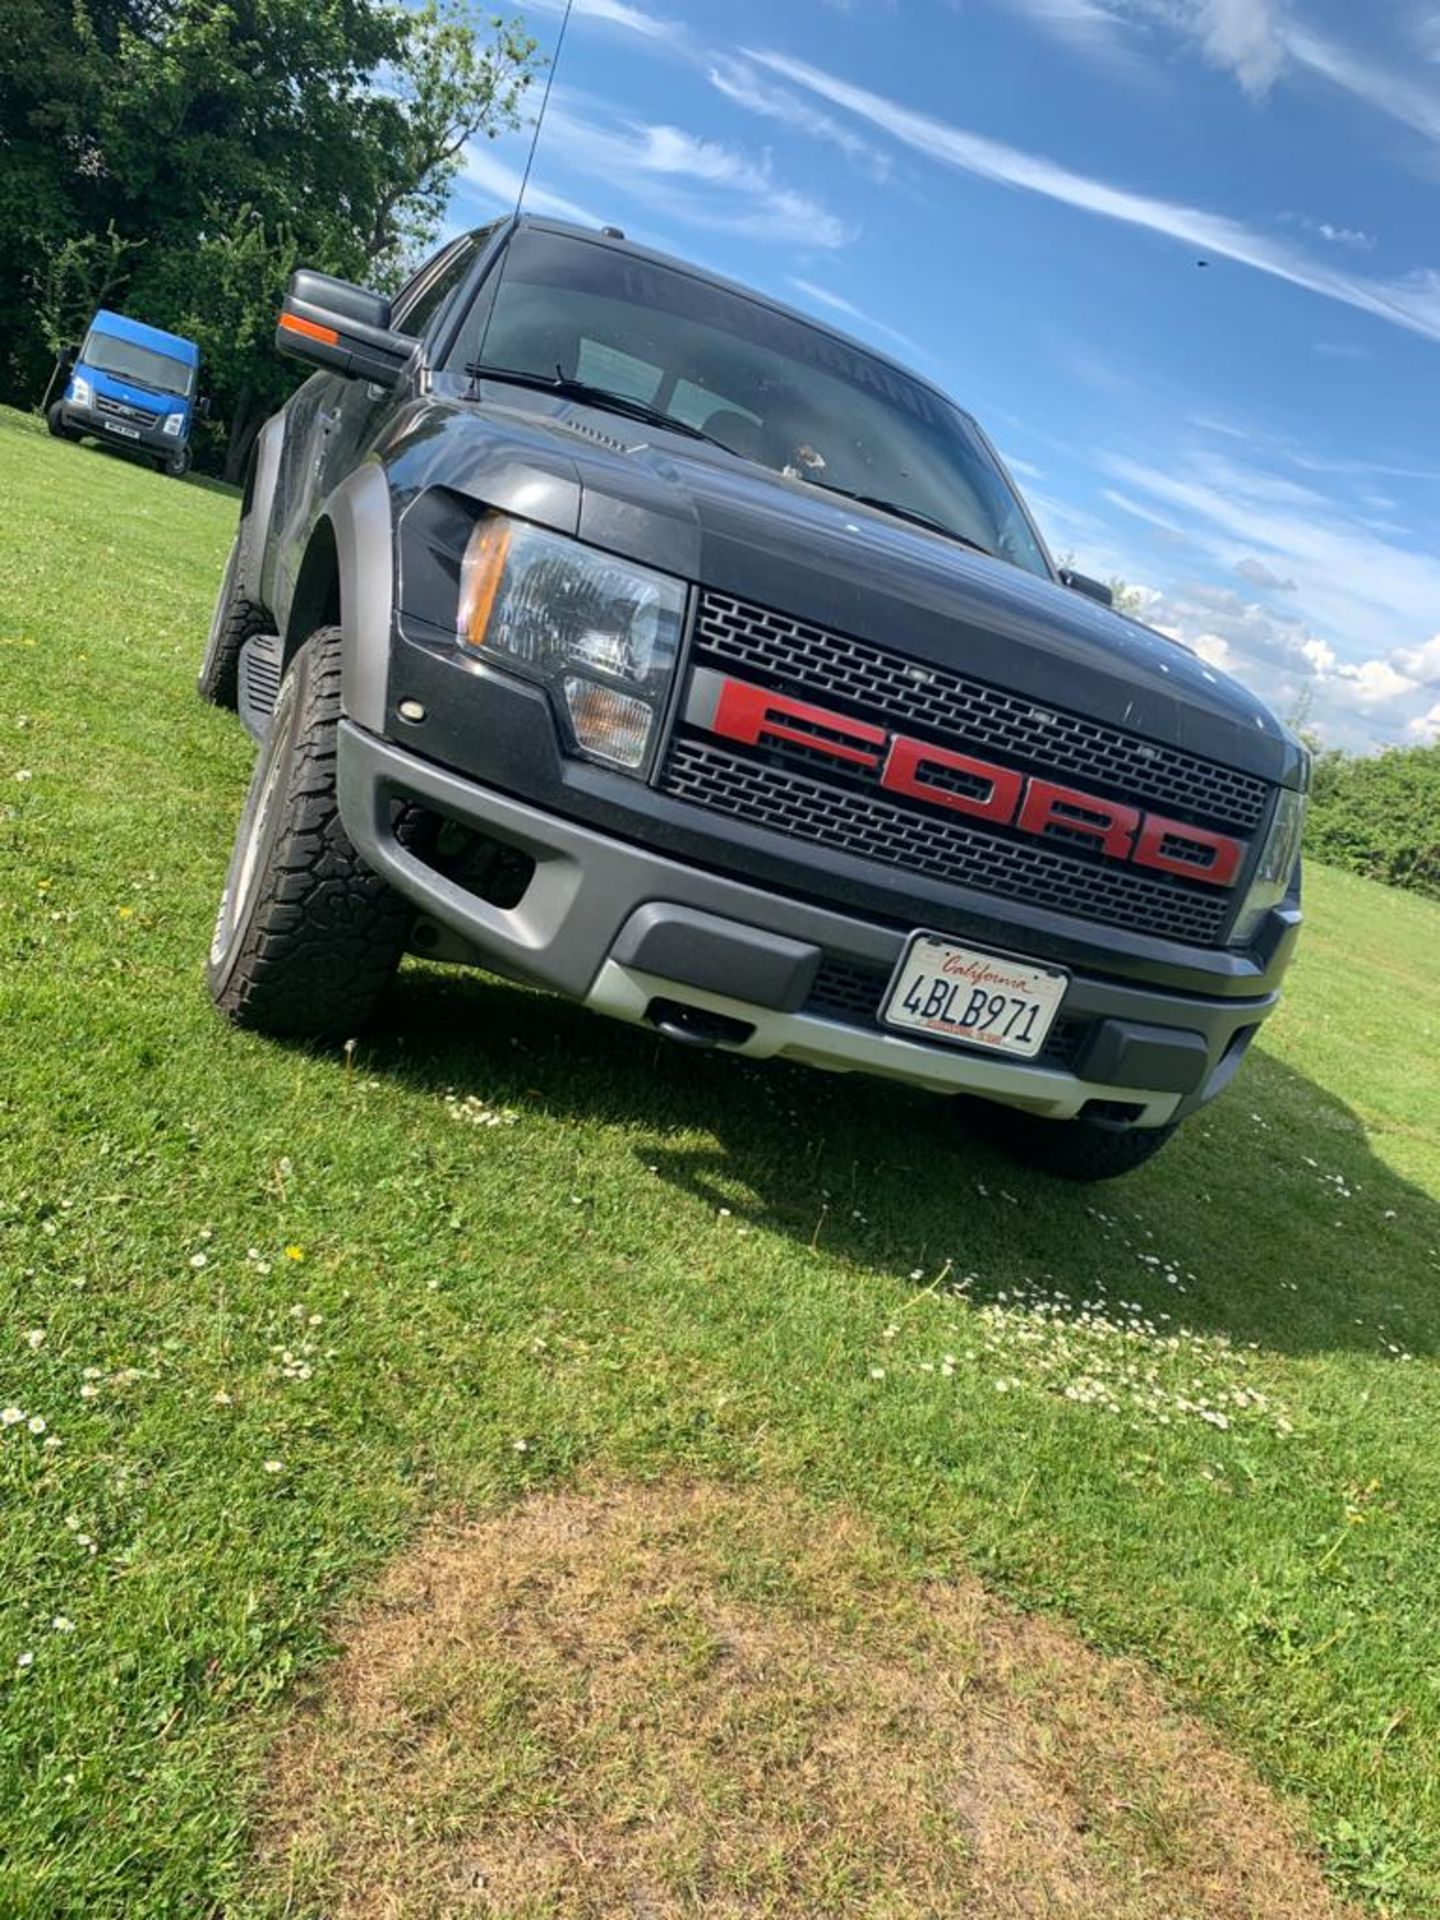 2012 FORD F-150 6.2L V8 RAPTOR - 65,000 MILES, LOTS OF UPGRADED PARTS, READY IN UK WITH NOVA APP - Image 18 of 18